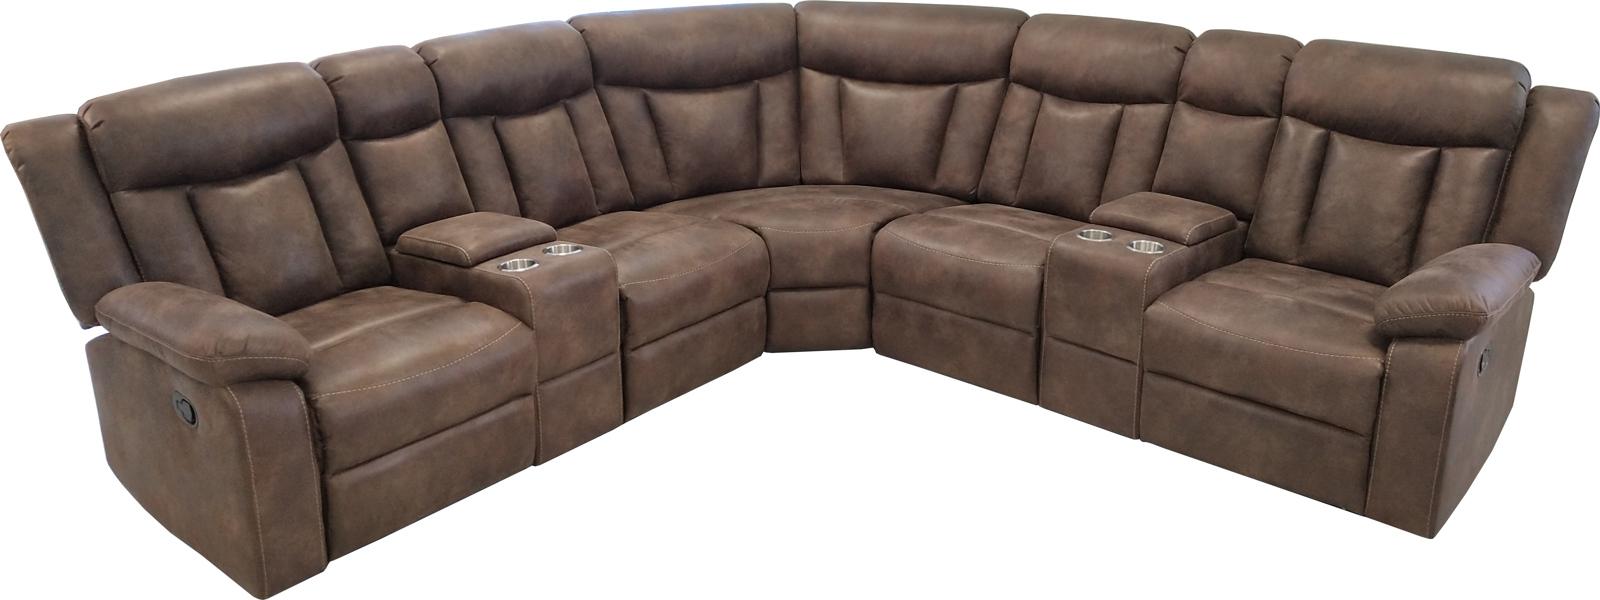 New Classic Stewart Power Sectional Living Room Set in Adobe